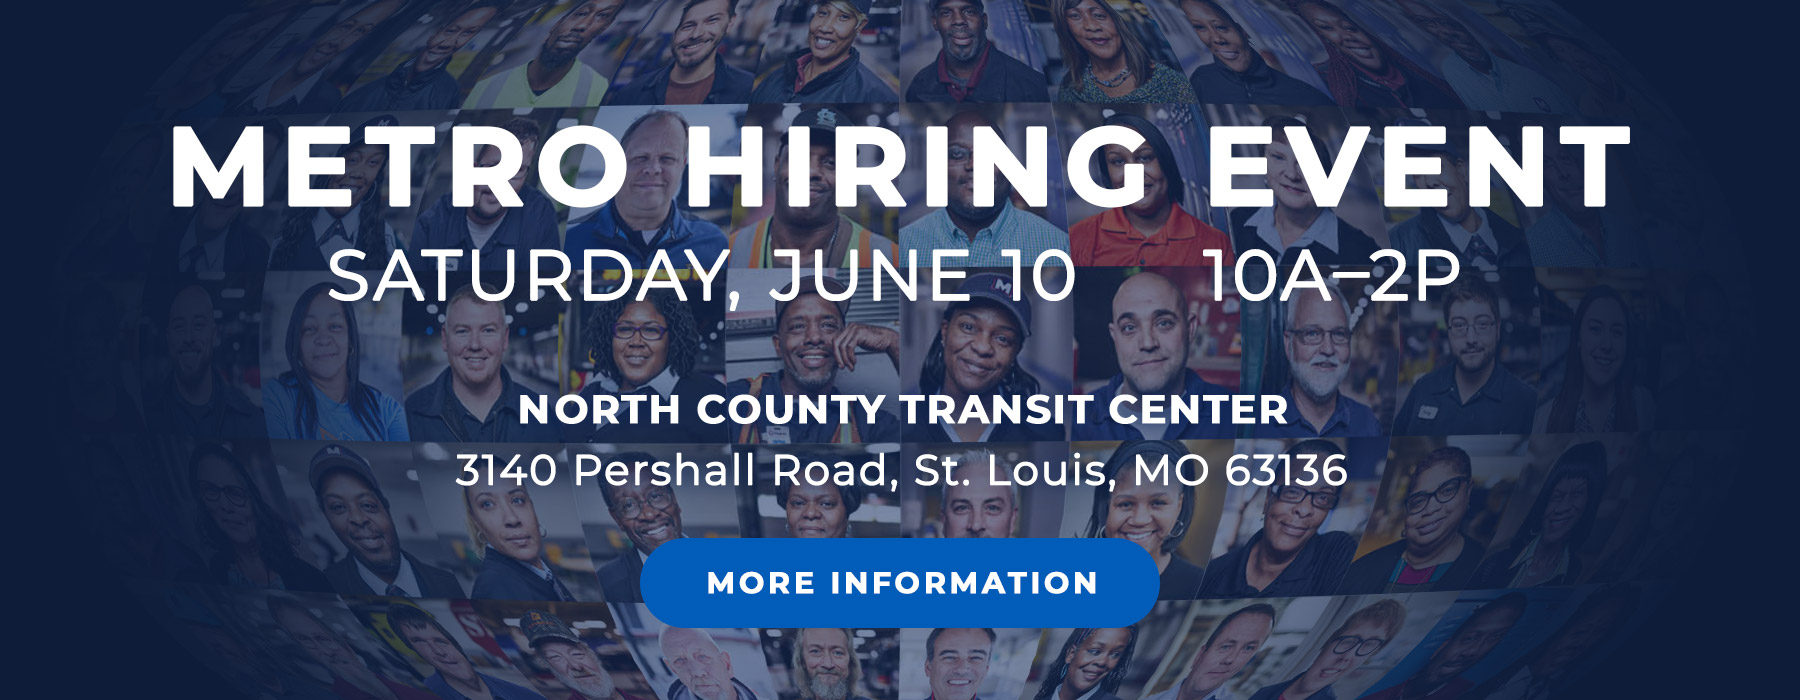 HIRING EVENT: Saturday June 10 from 10 a.m. to 2 p.m. at North County Transit Center, 3140 Pershall Road